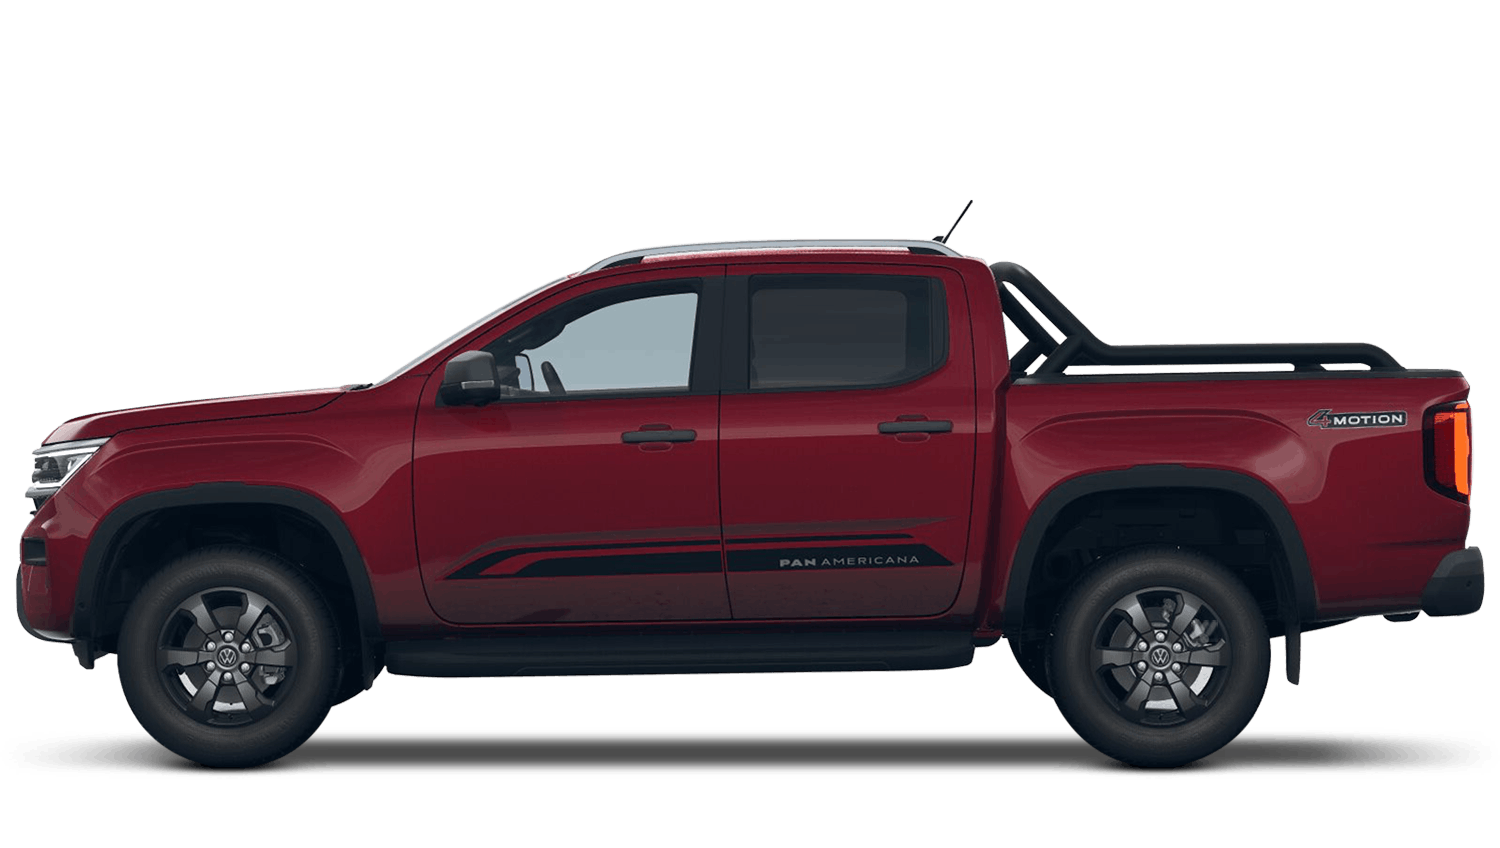 Amarok PanAmericana Contract Hire Offer